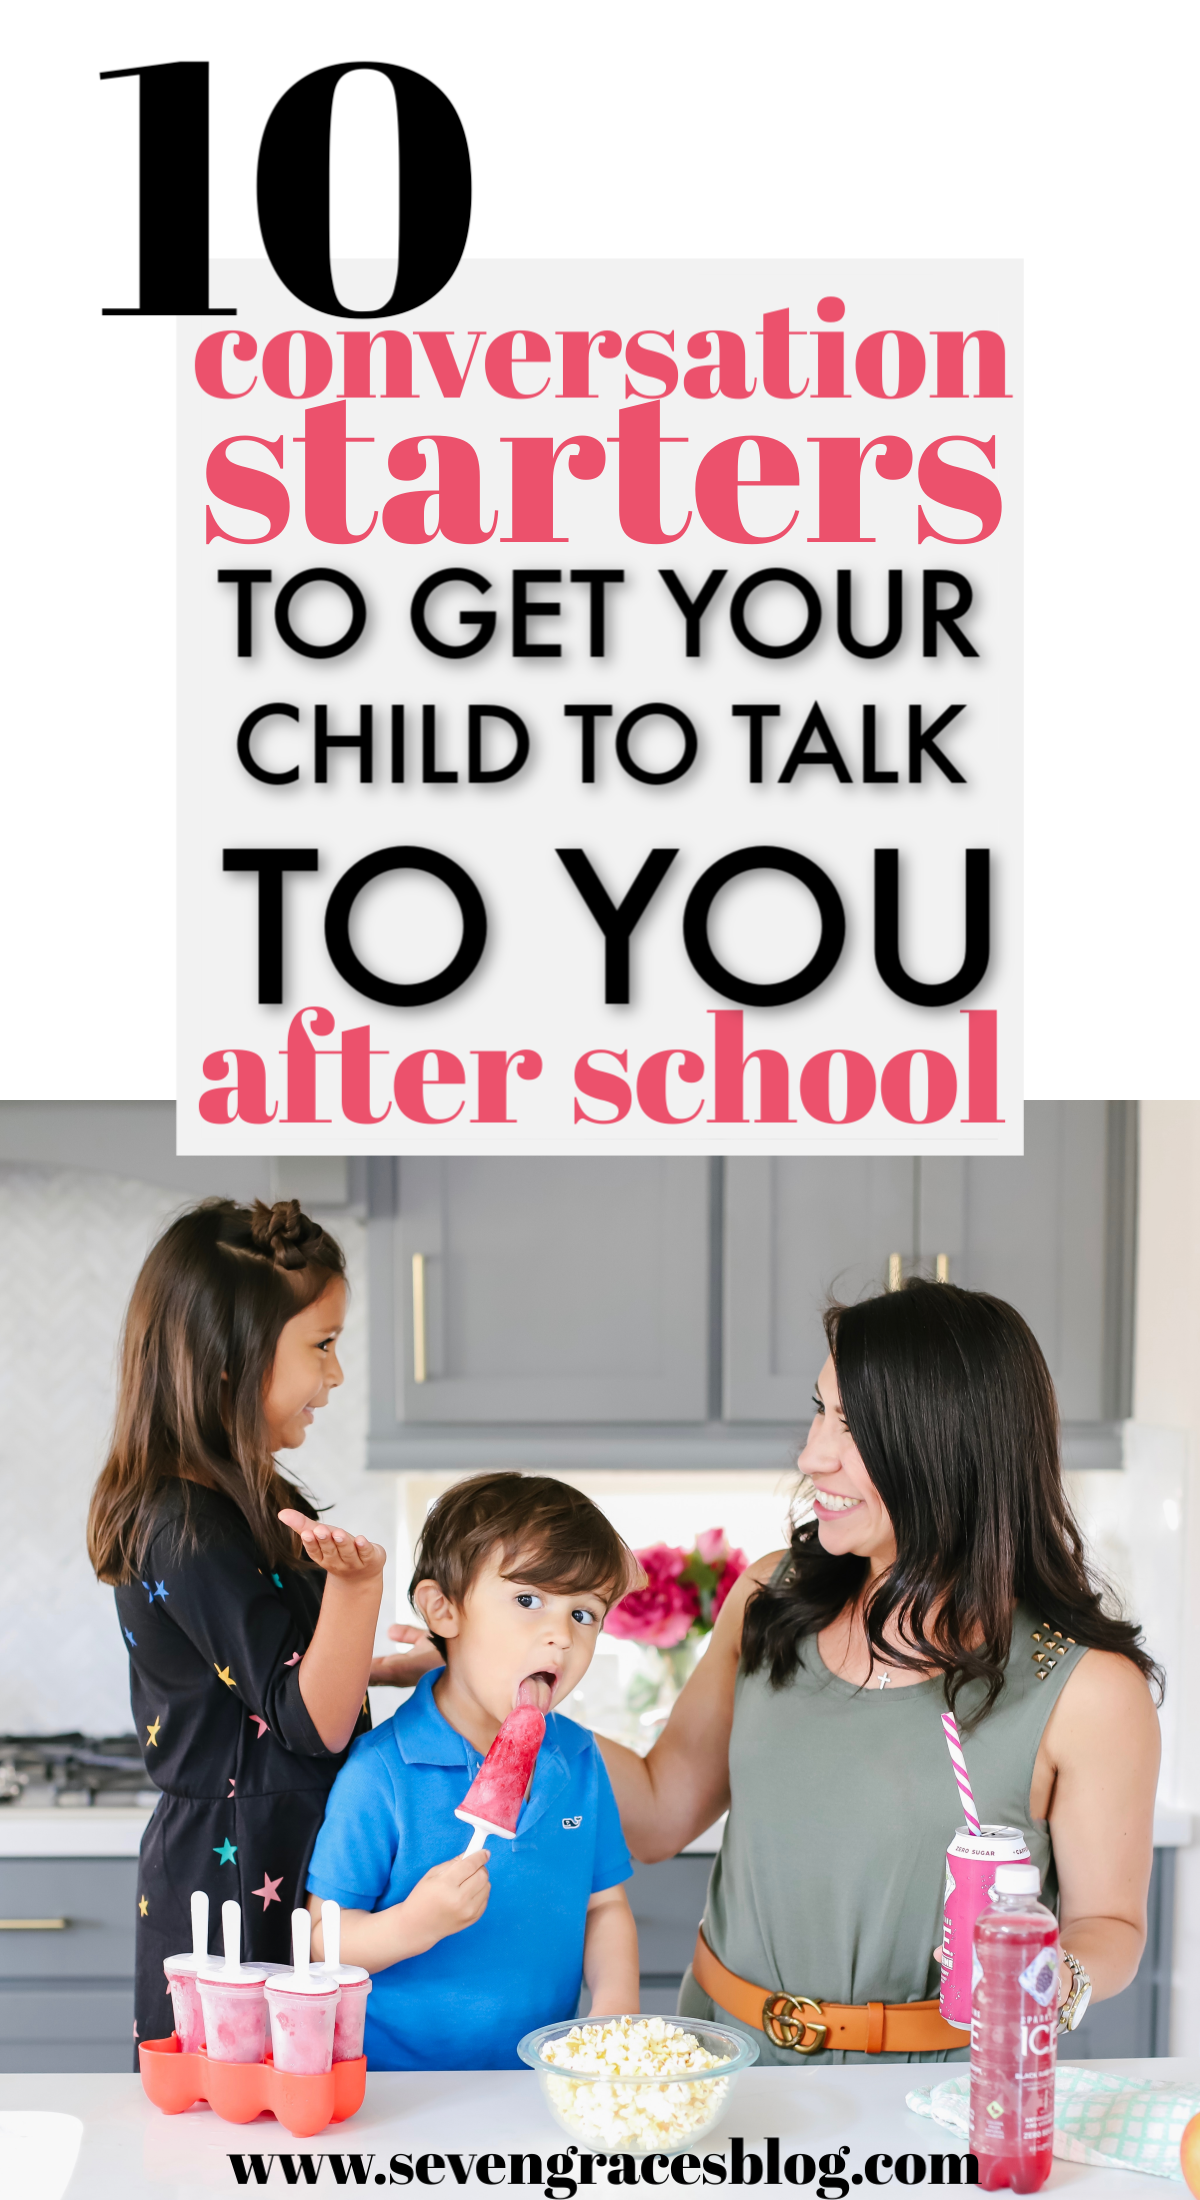 10 of the best conversation starters to get your child to open up to you after school and a fun new popsicle treat to enjoy while chatting. #ad #SparklingIceLife @SparklingIce #GetFizzy